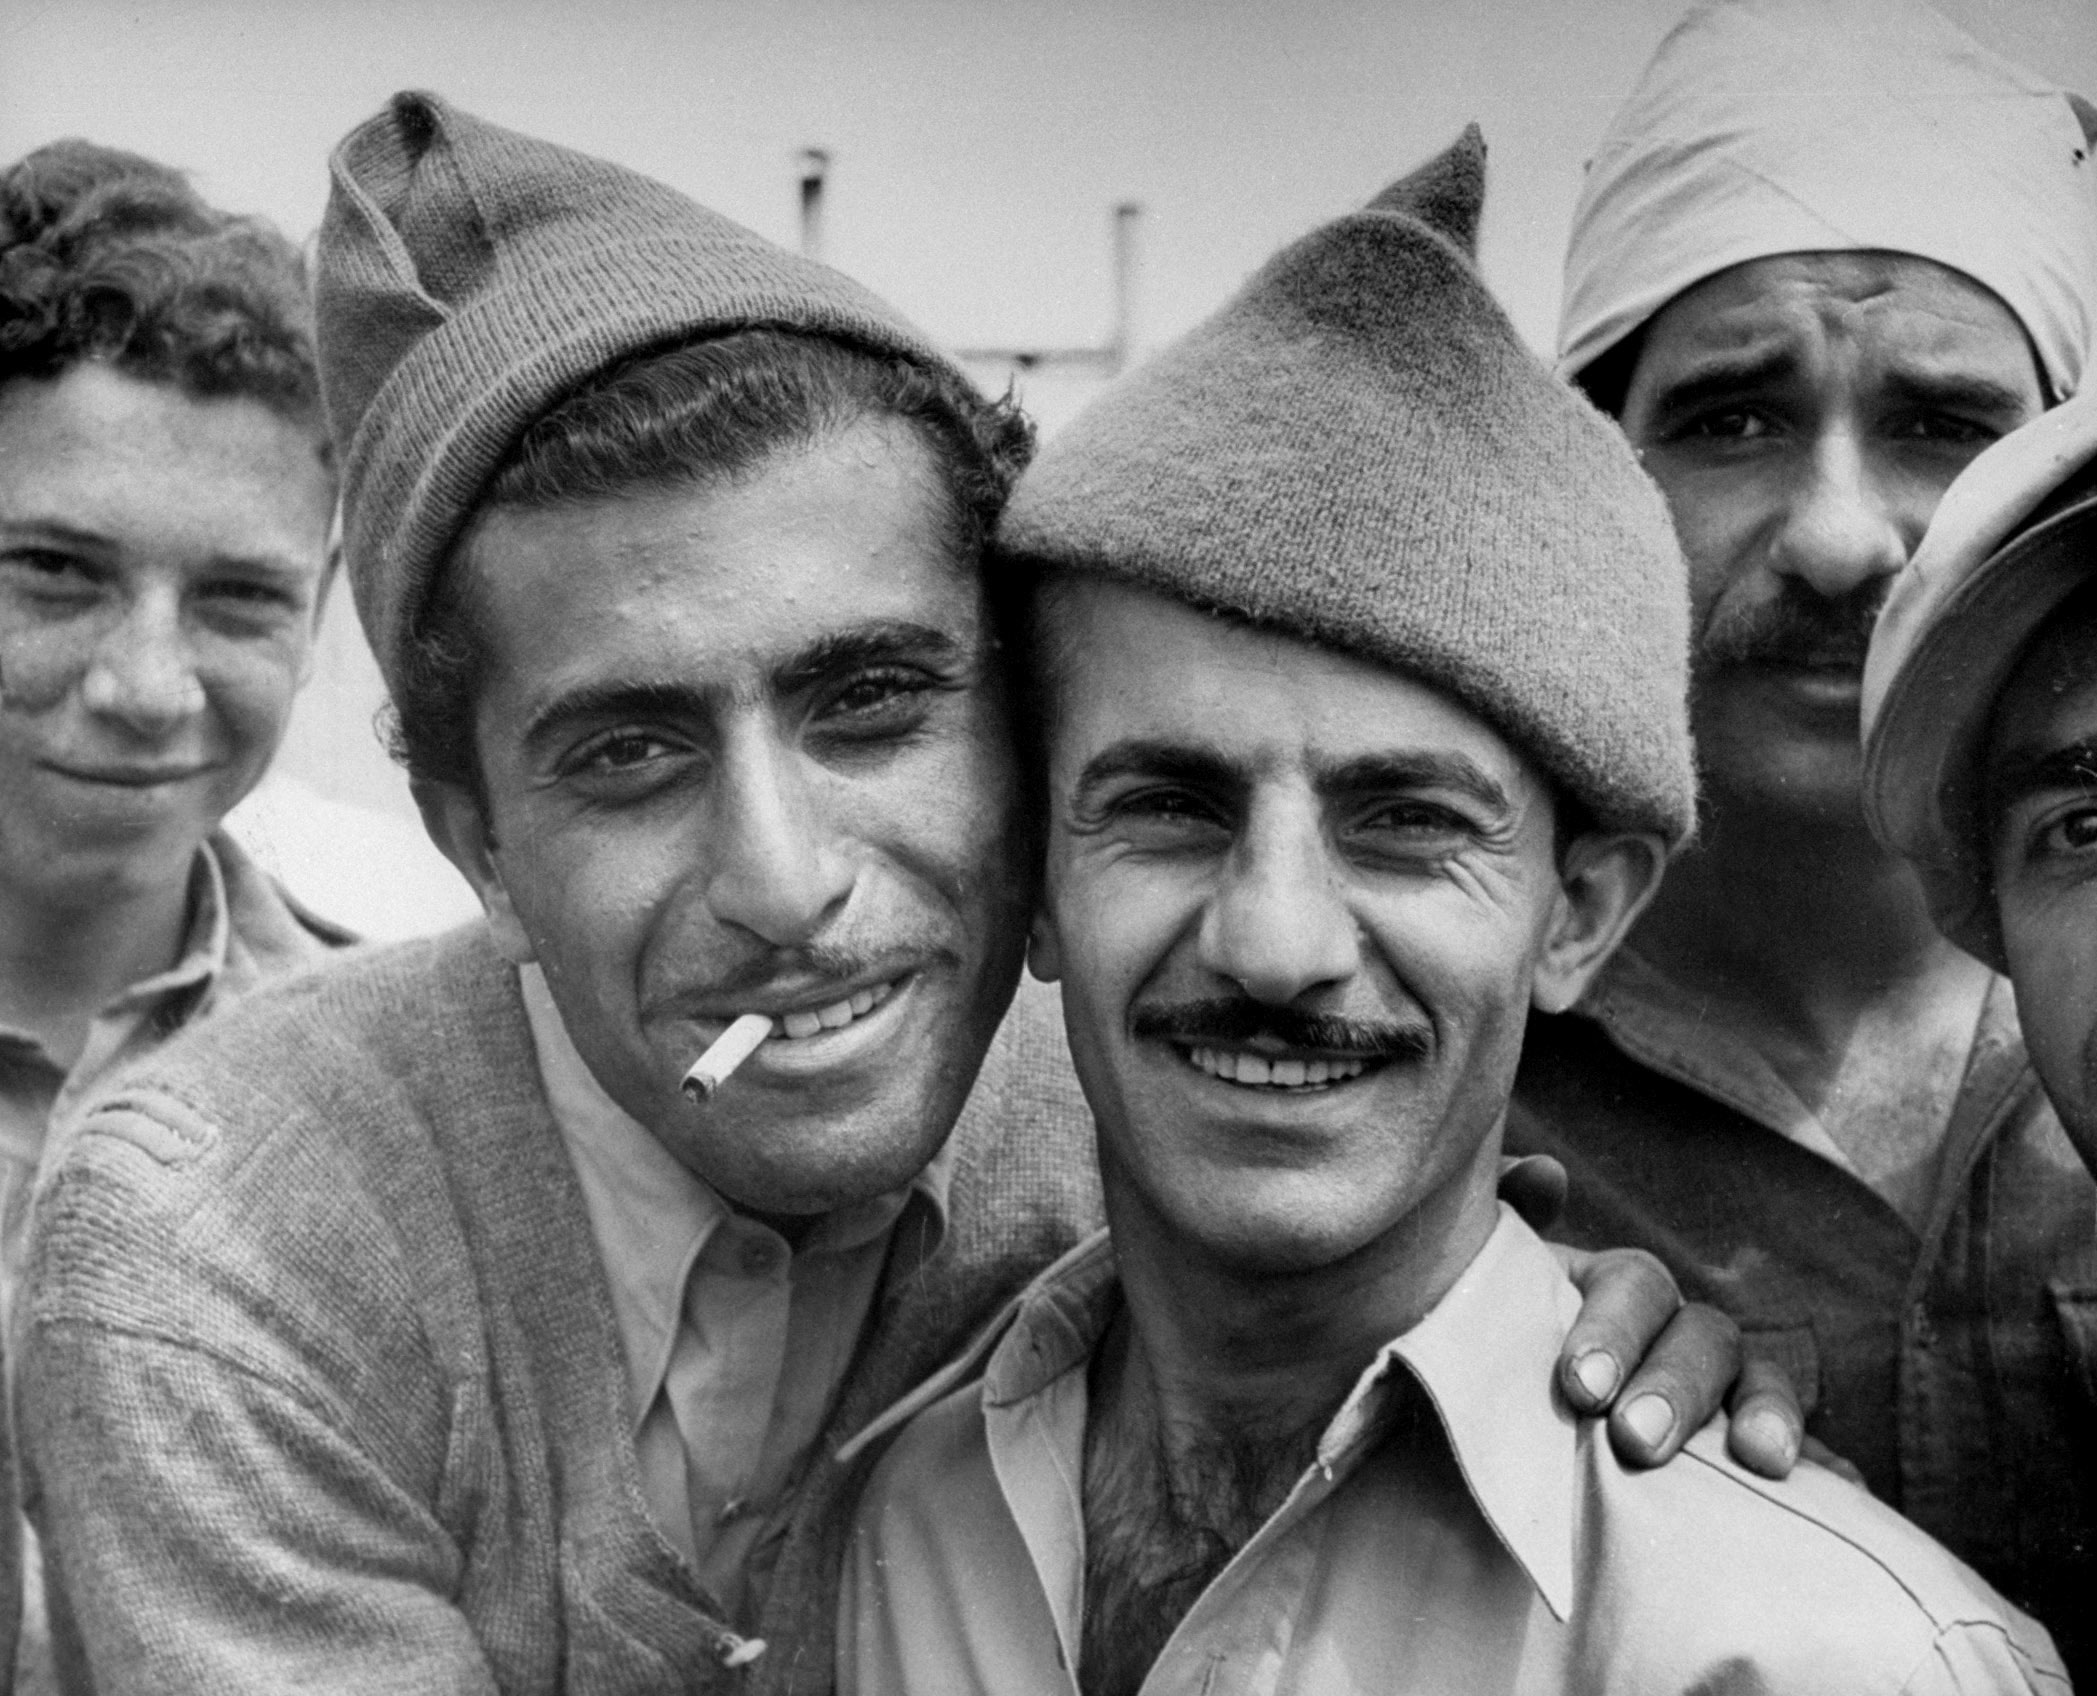 Israeli men photographed shortly after the establishment of the state of Israel, exact location unknown, May 1948.